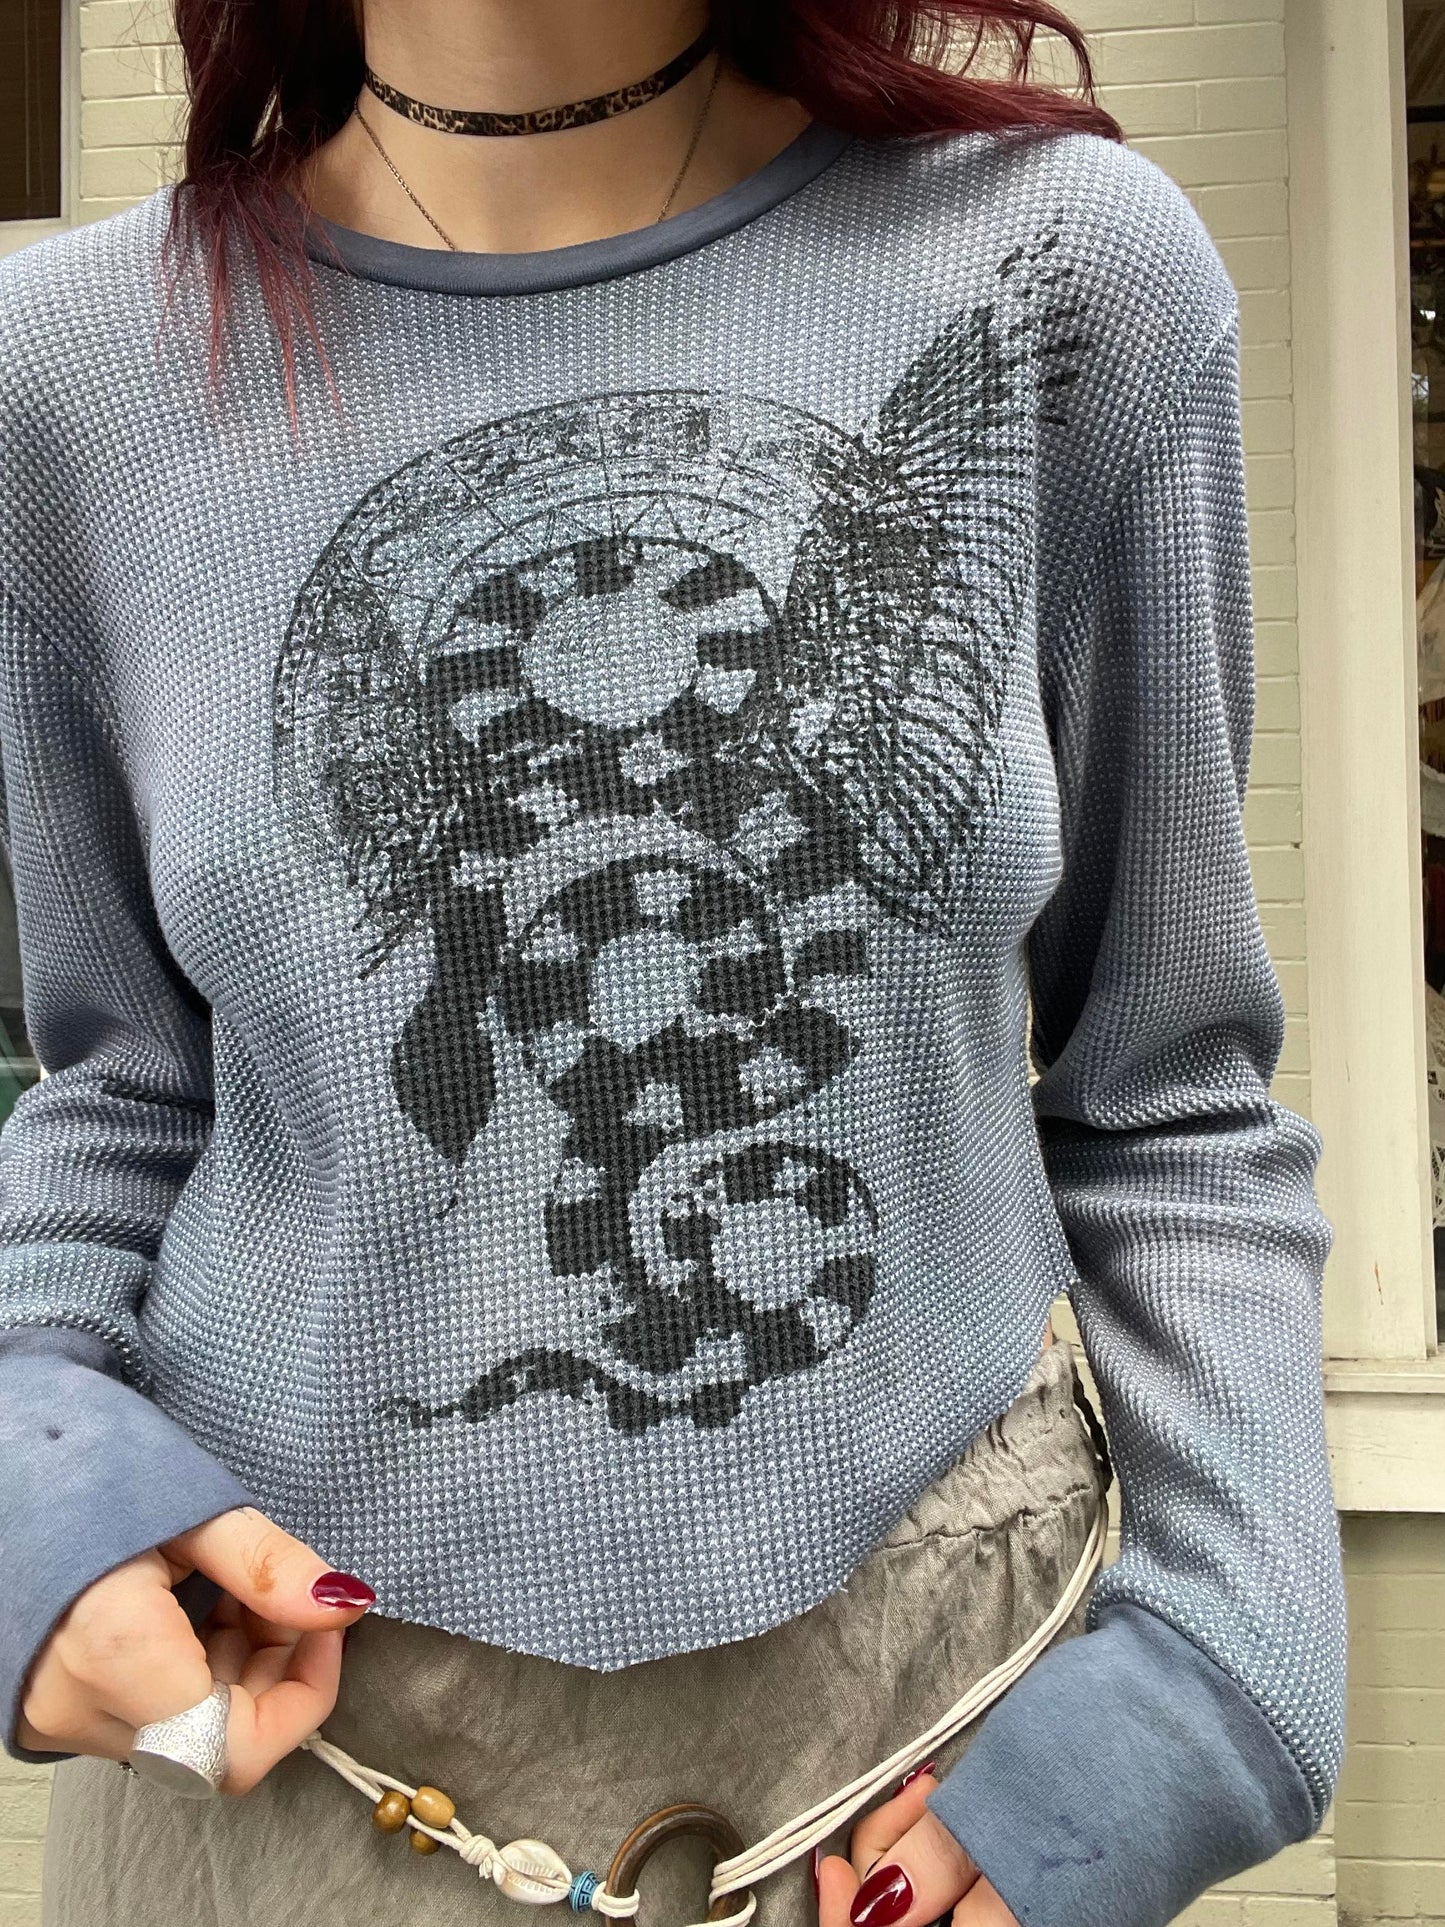 Winged Serpent Graphic Long Sleeve Top #1